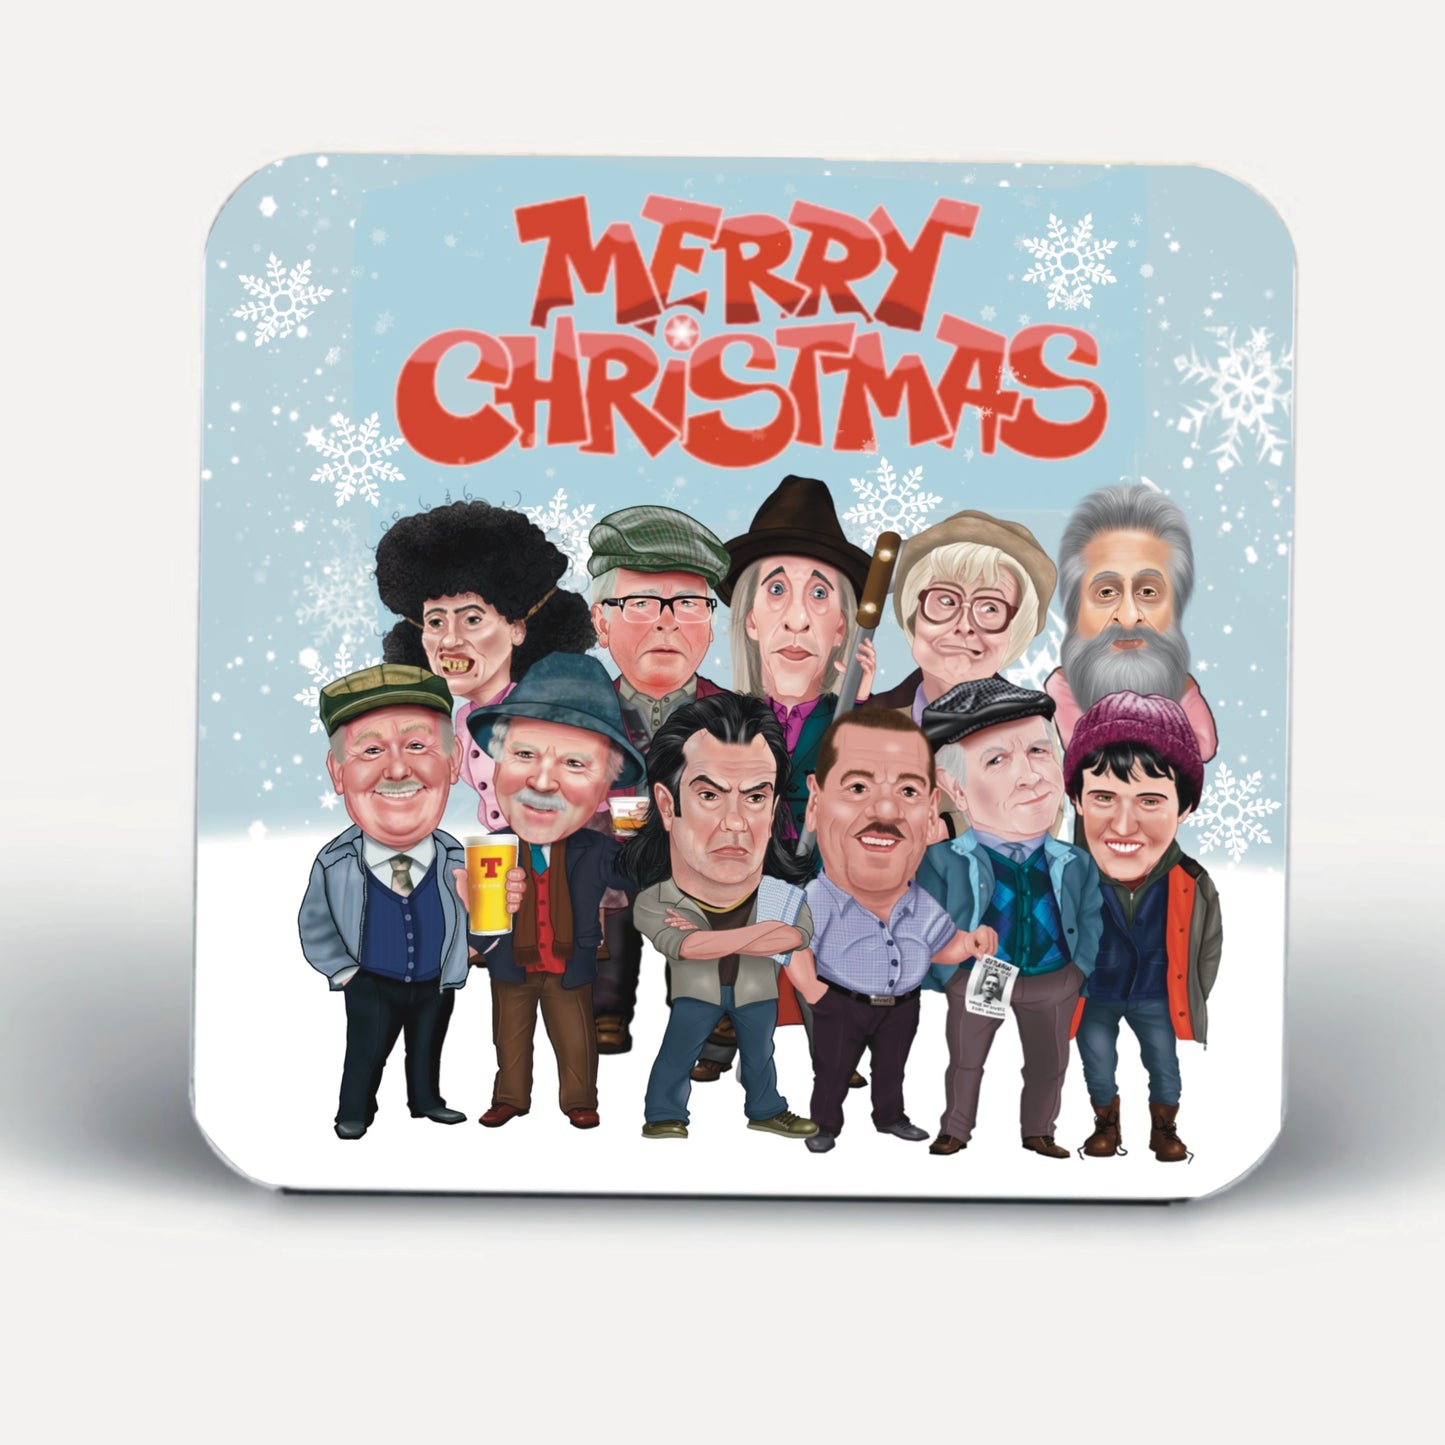 Set of 20 Coasters-Coaster Auld Pals Still Game and Two Doors Down mixture bumper offer